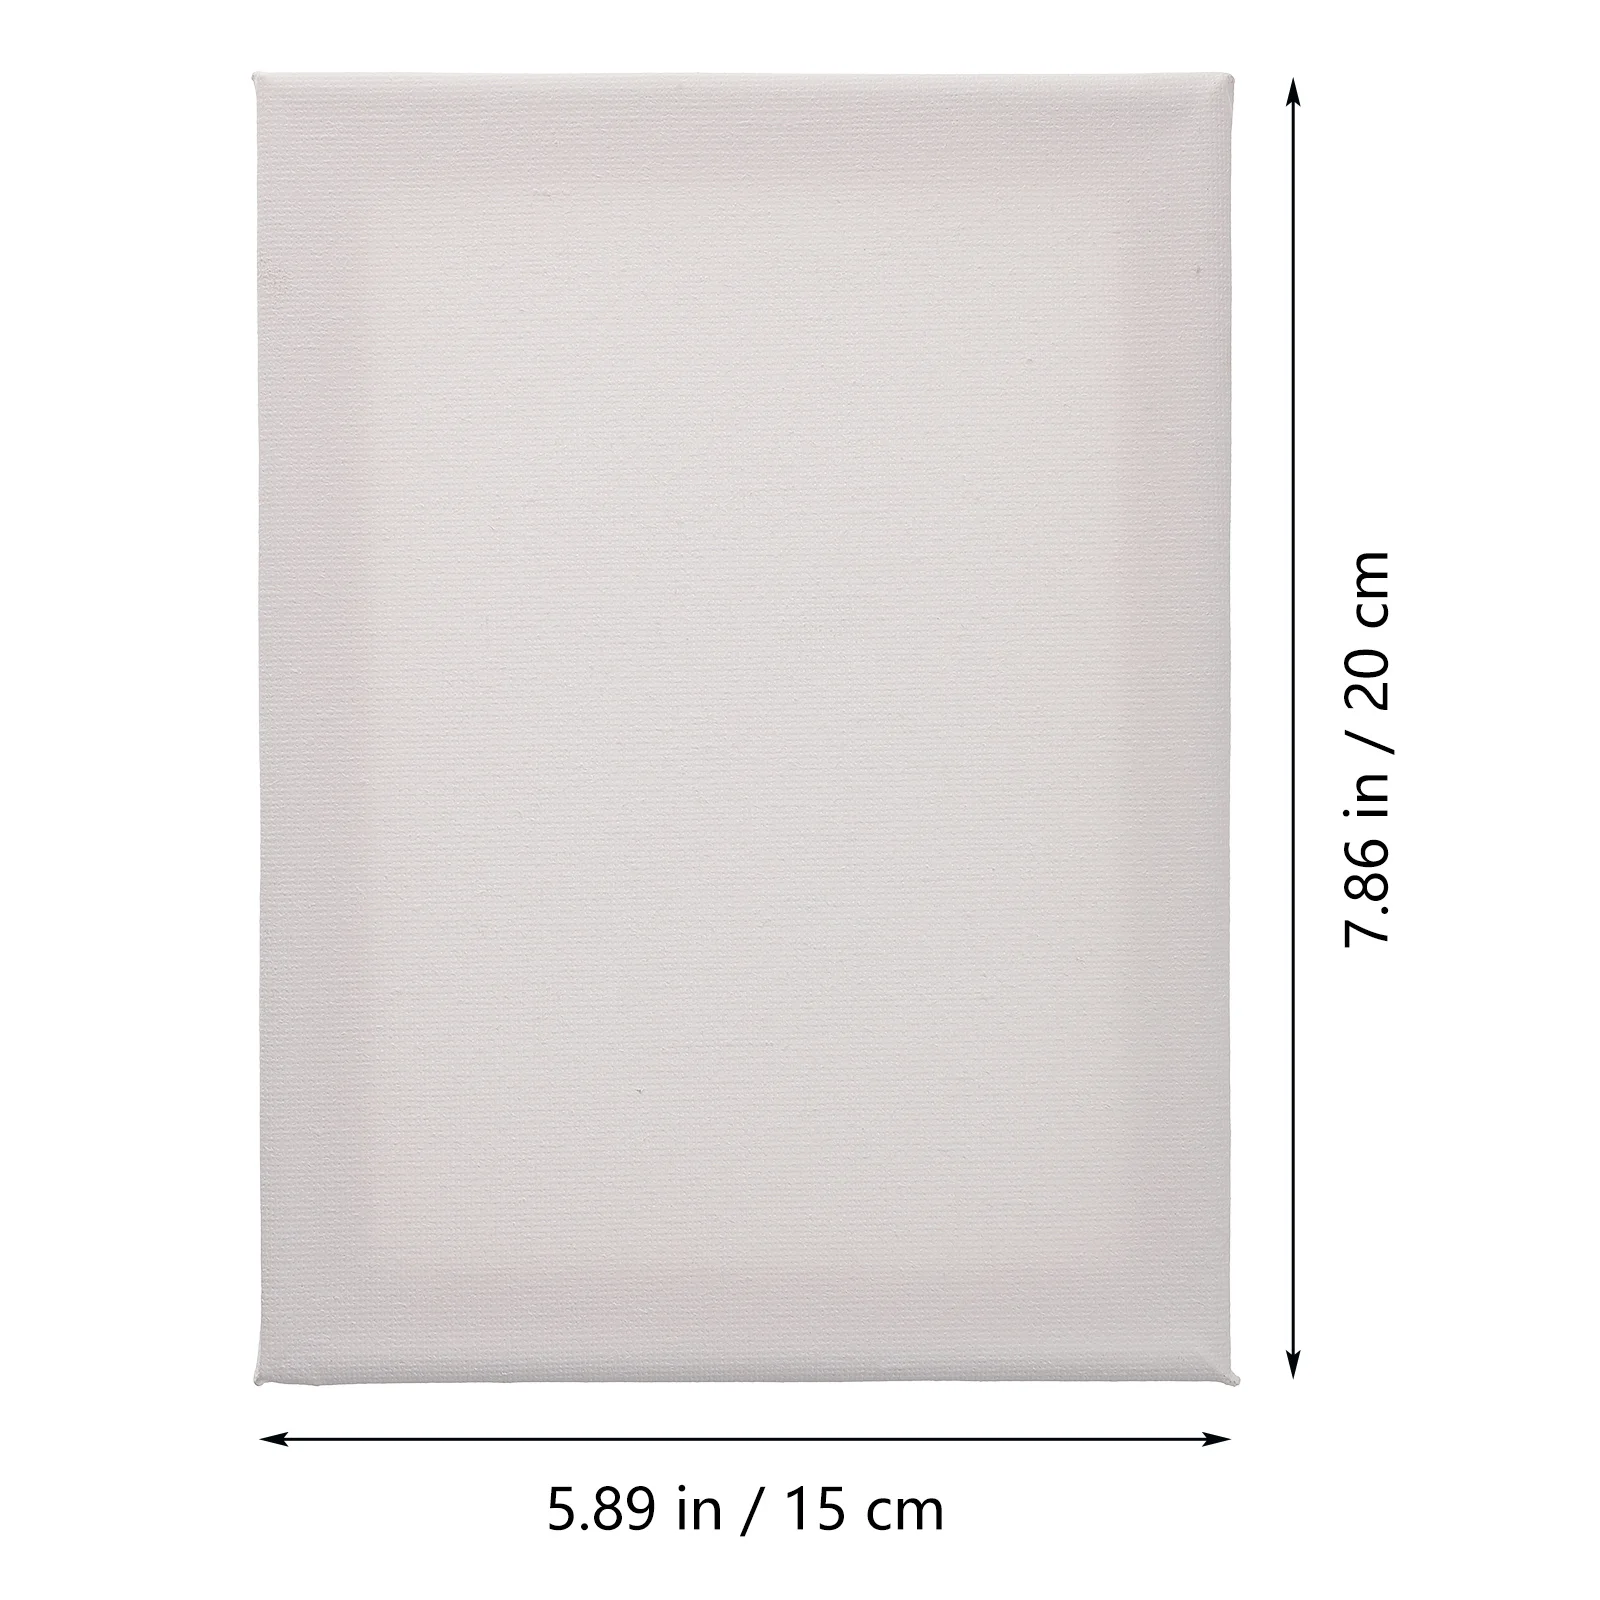 5 Pcs Blank Canvas Watercolor Paint Board to Stretch Small Canvases for Painting